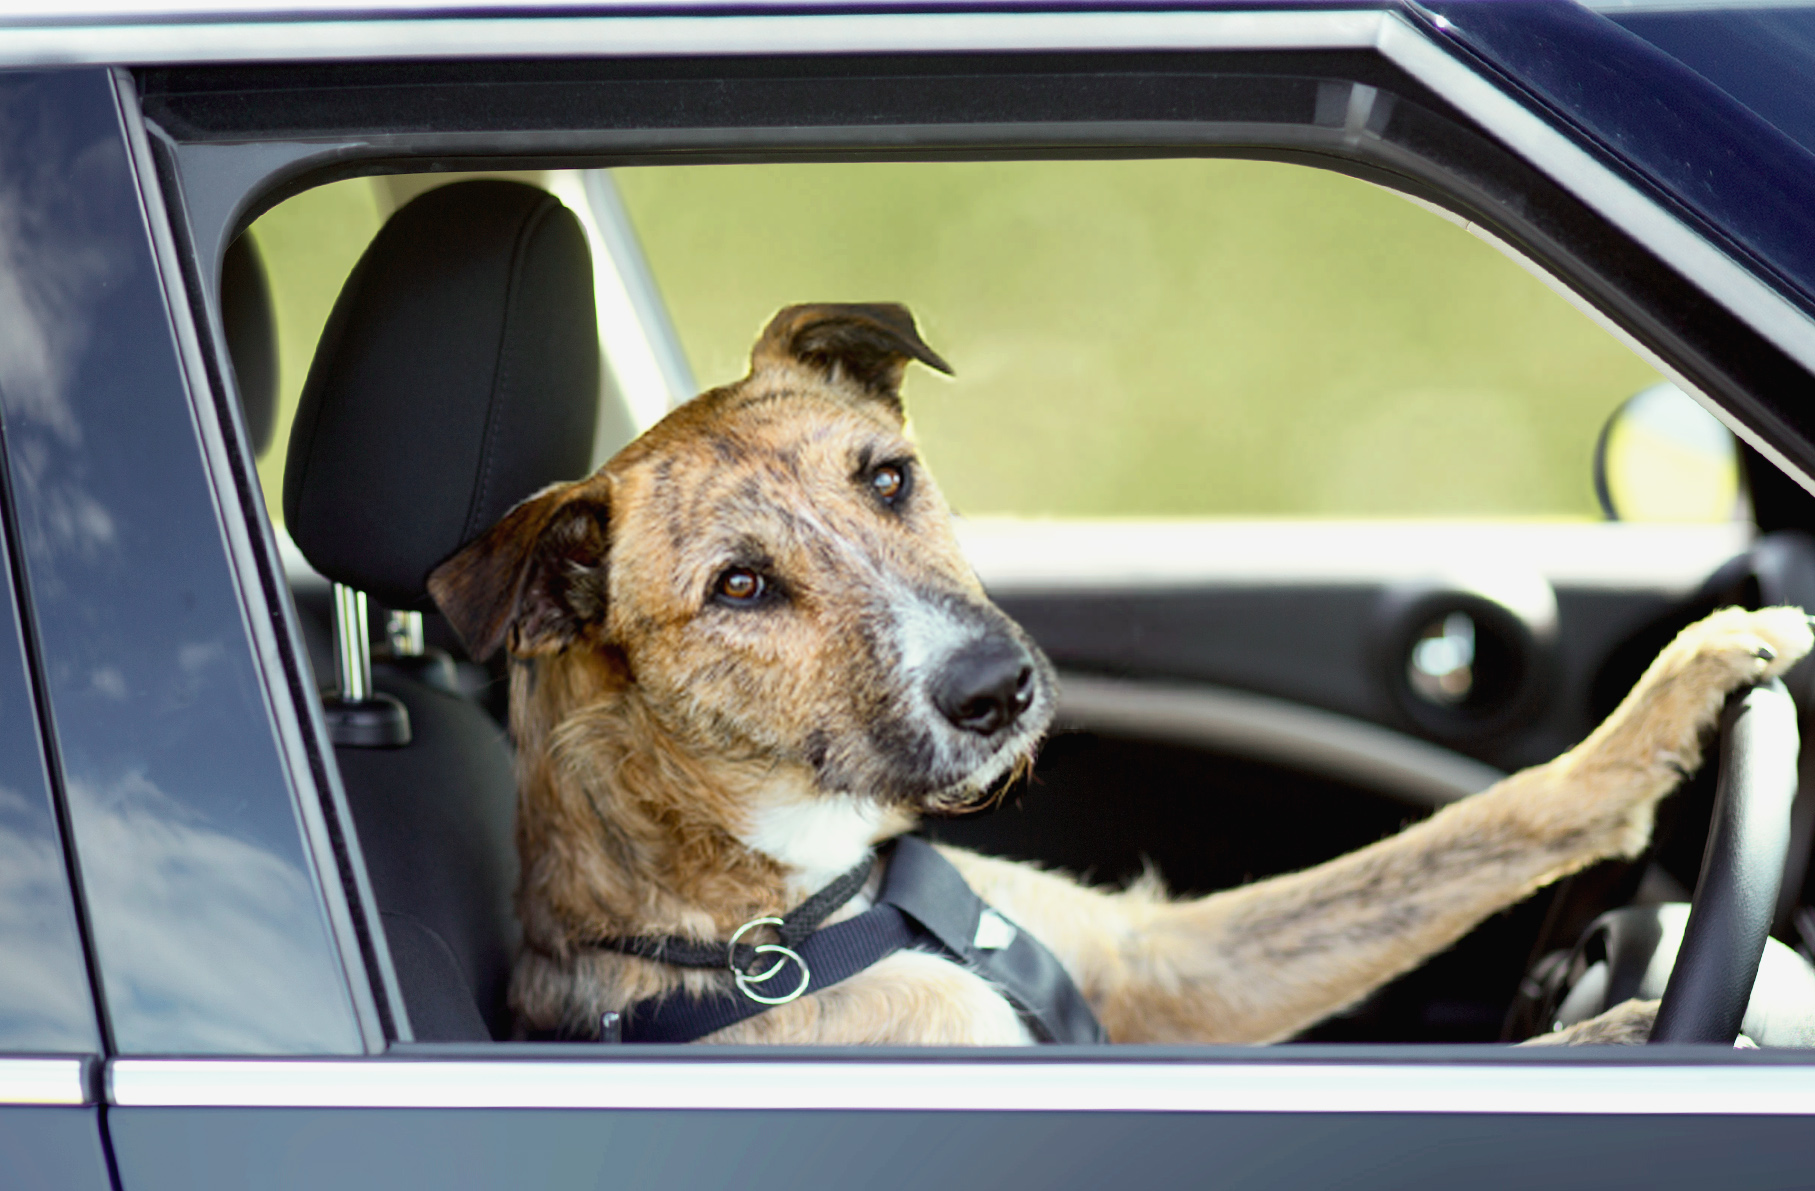 Take me for a ride! How to Keep Your Dog (and YOU) Safe in the Car